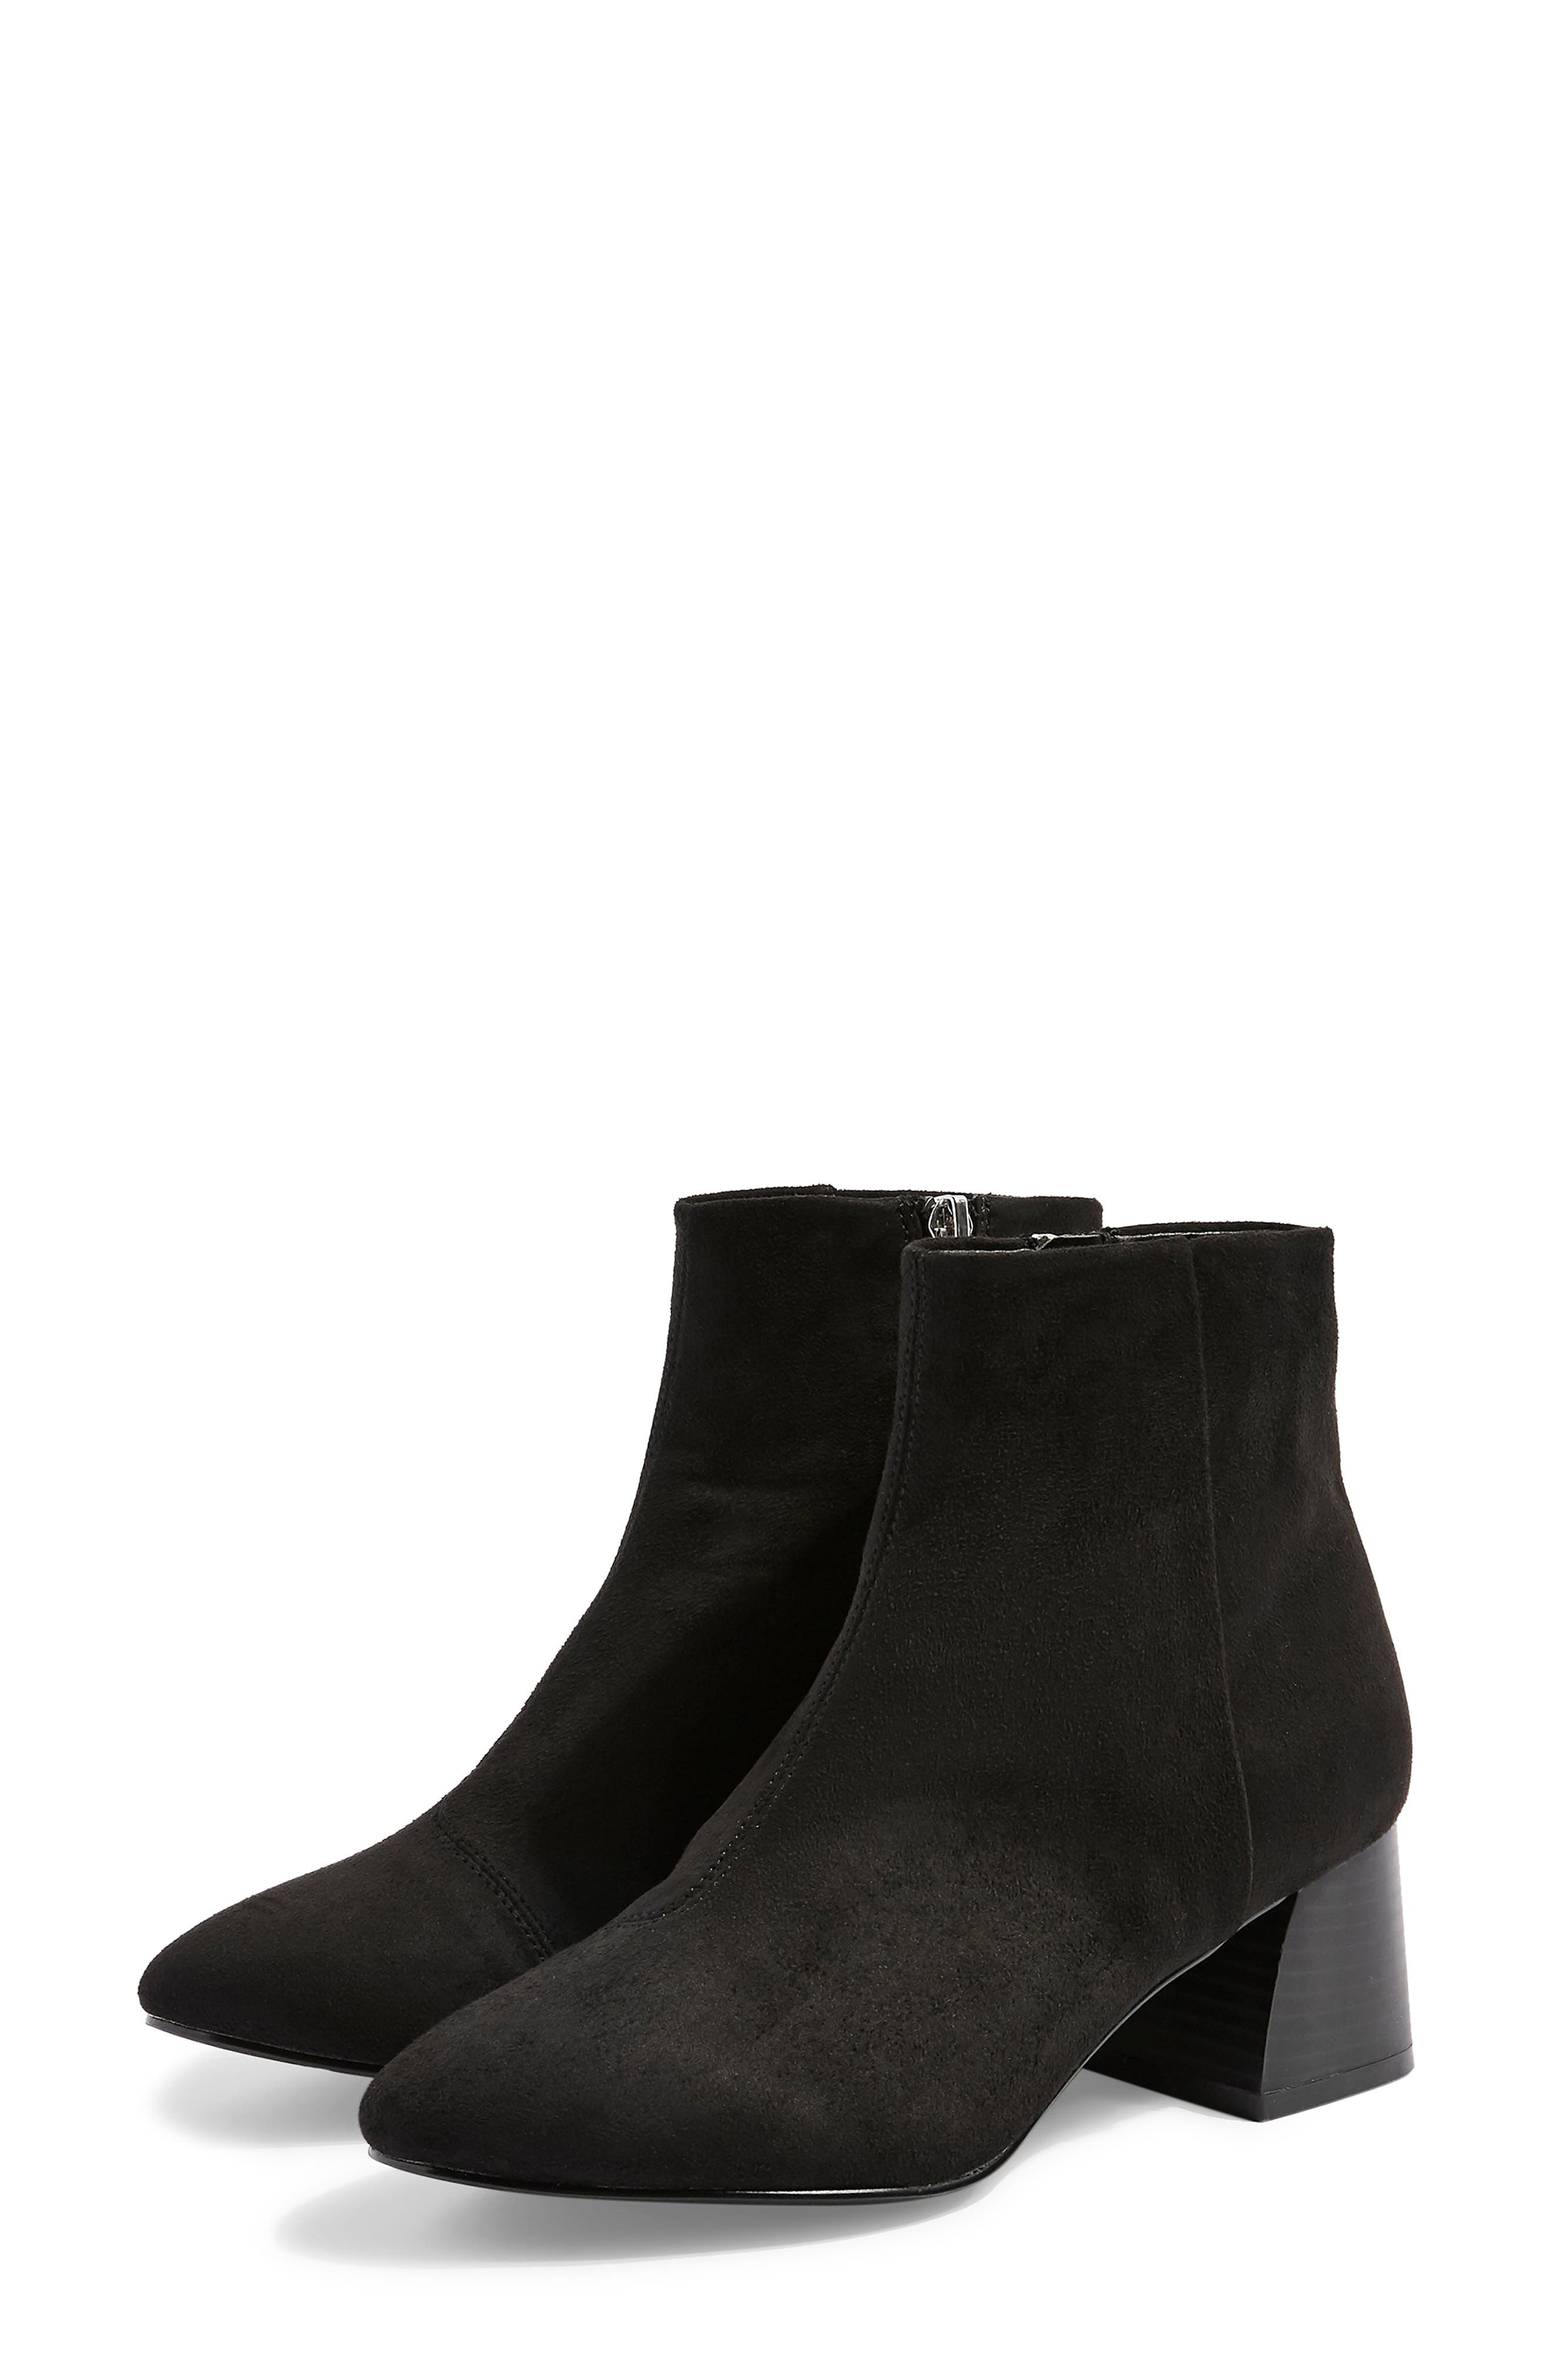 topshop babe boots